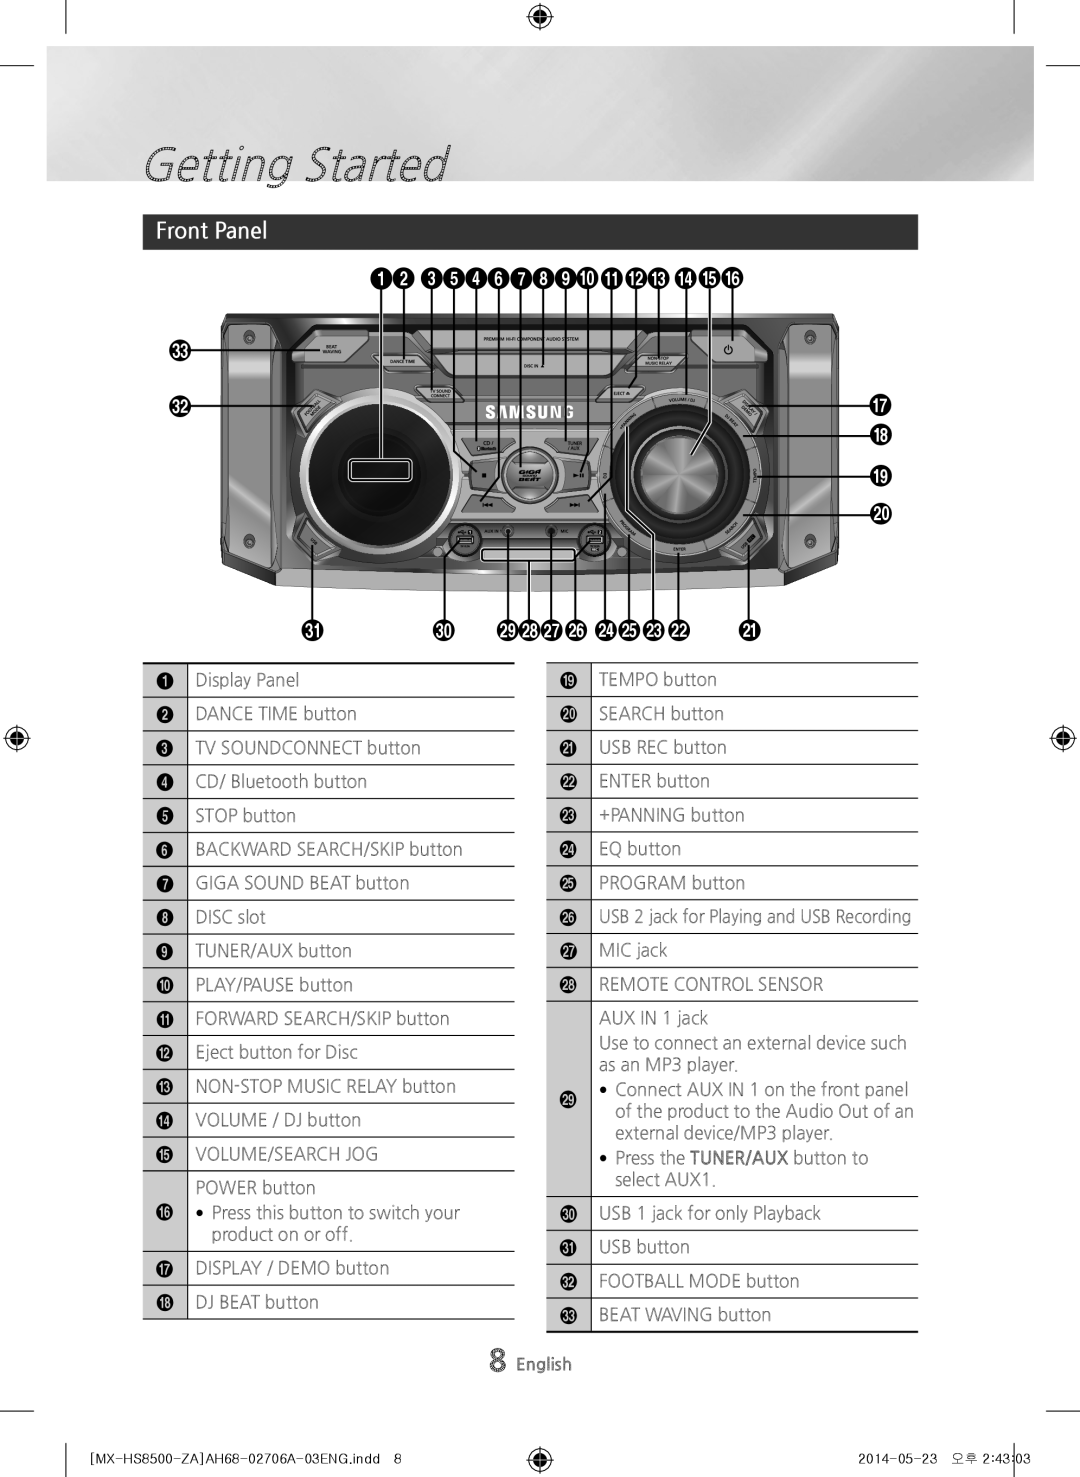 Samsung MX-HS8500 user manual Getting Started, Front Panel, 1235467890!@#$%, k j ihgf decb a 